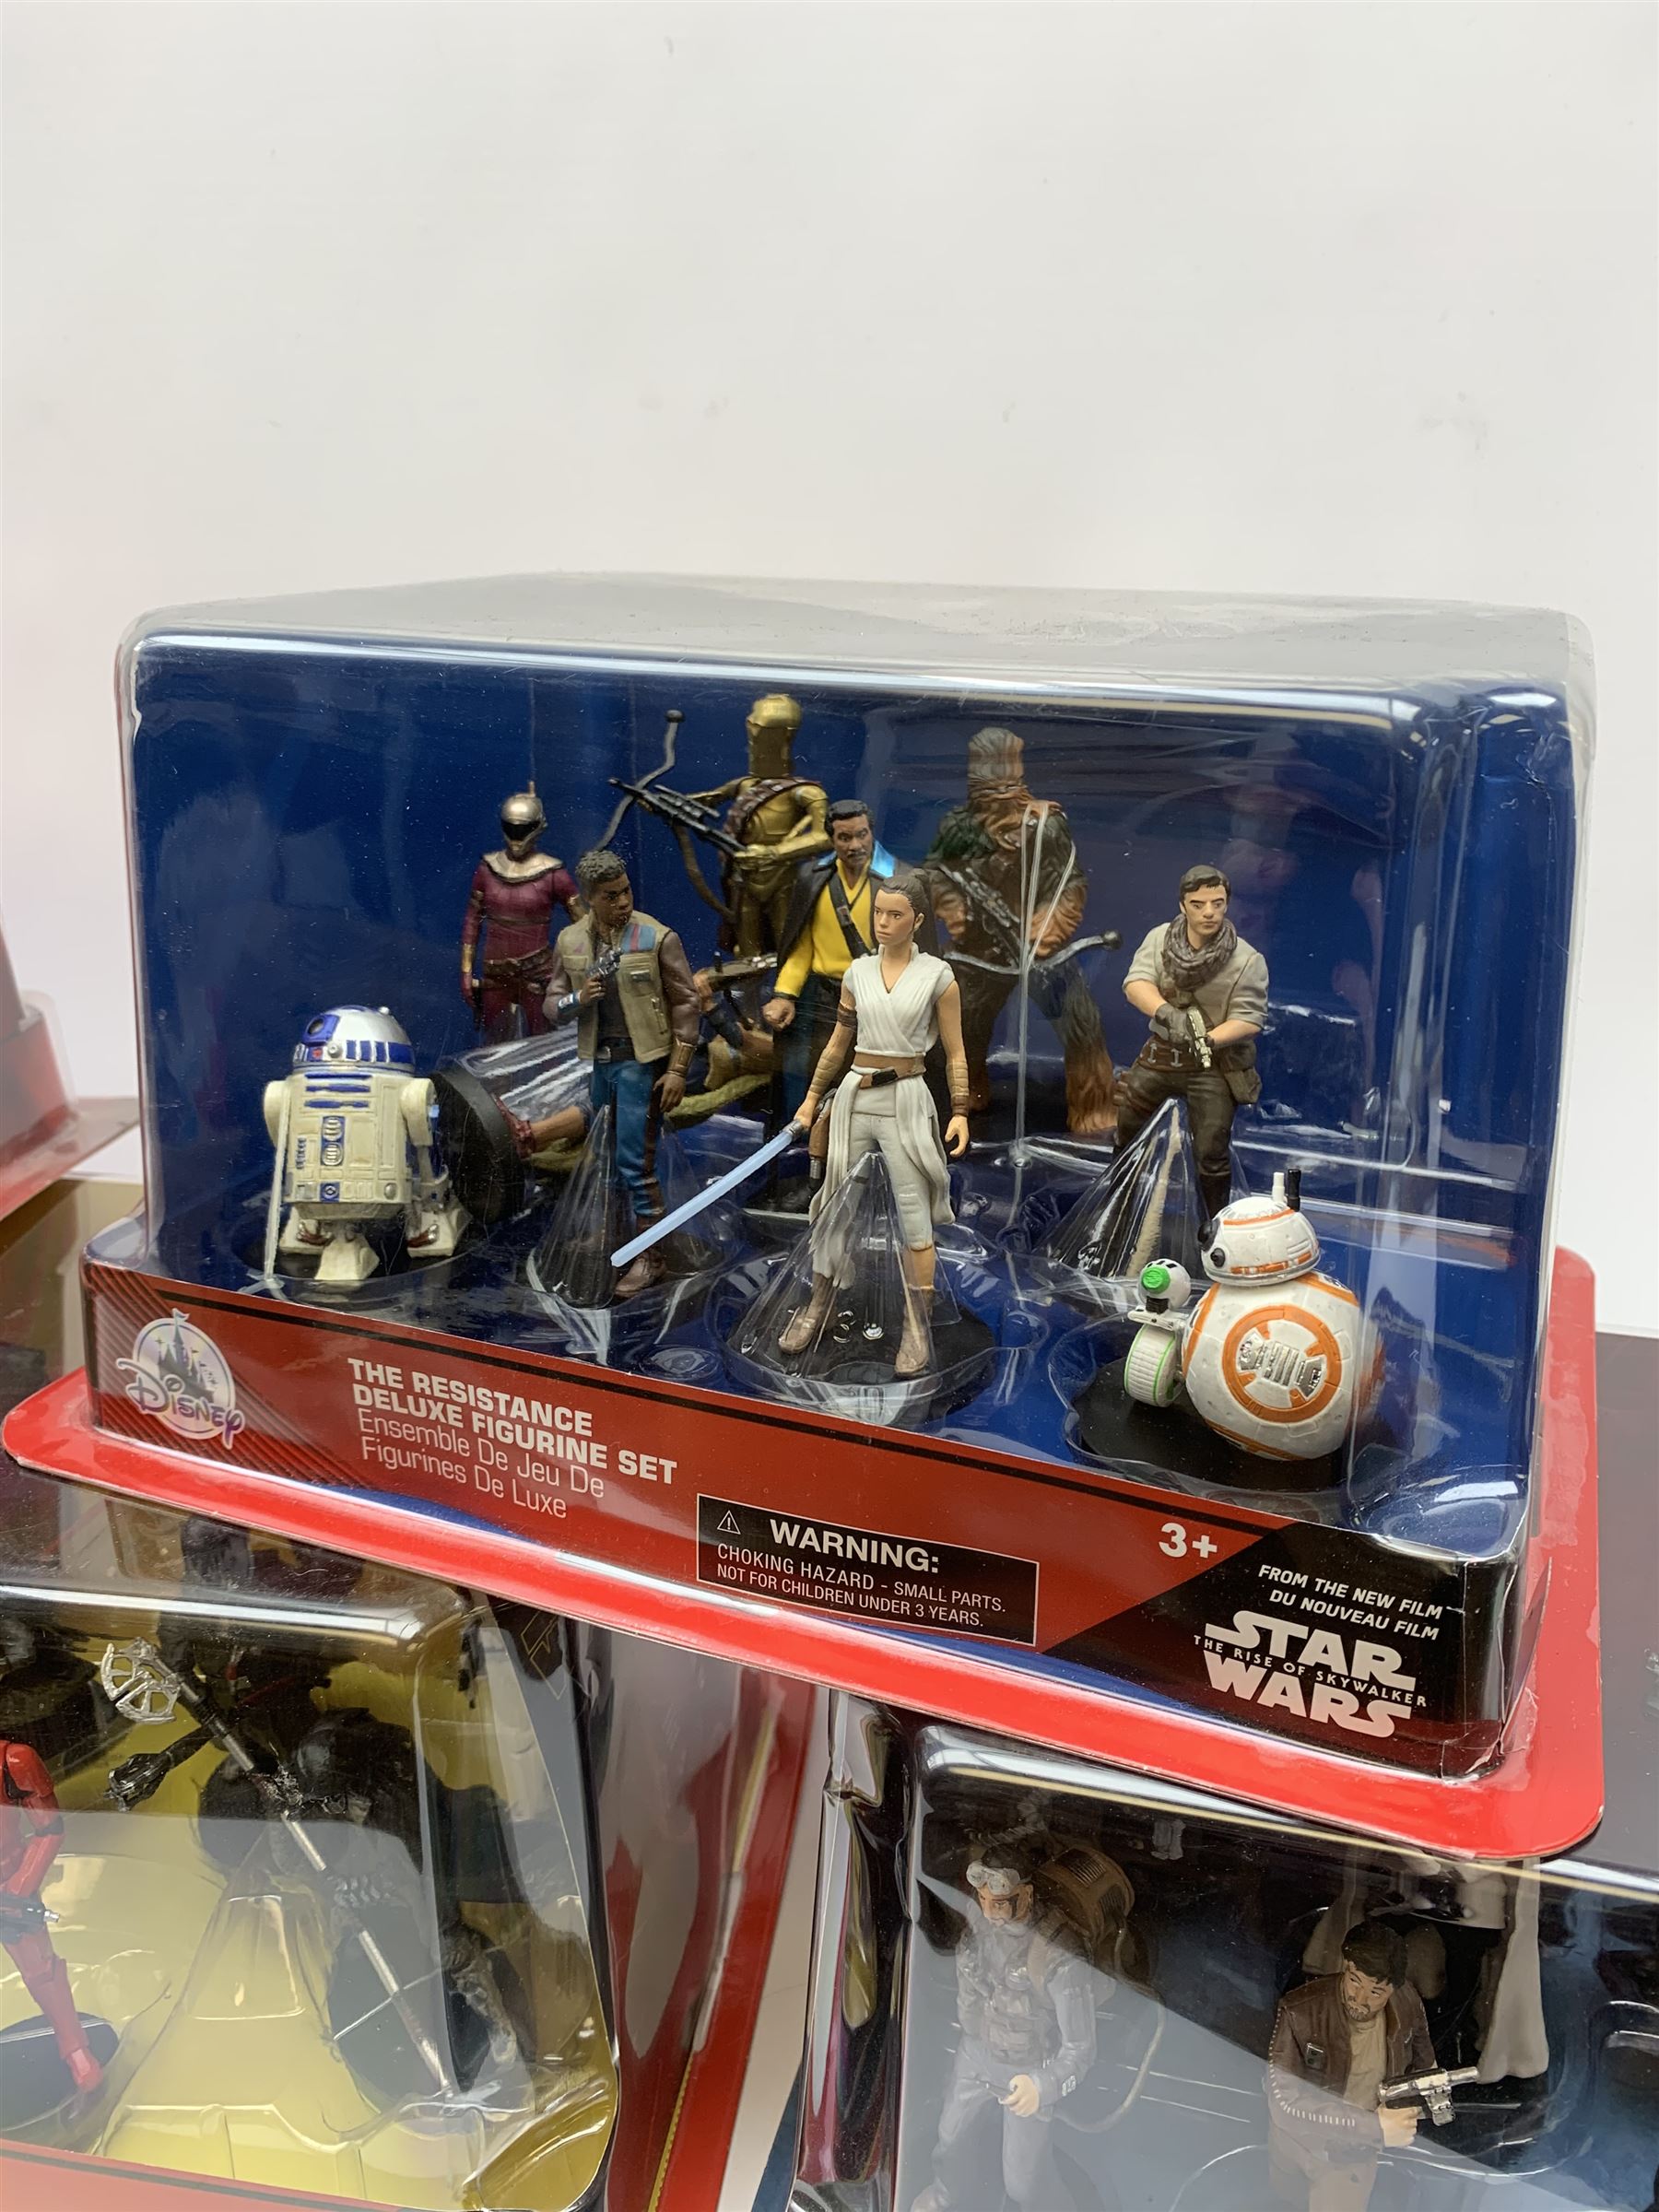 Star Wars - five Disney Store Deluxe figurine sets for The Last Jedi - Image 2 of 5